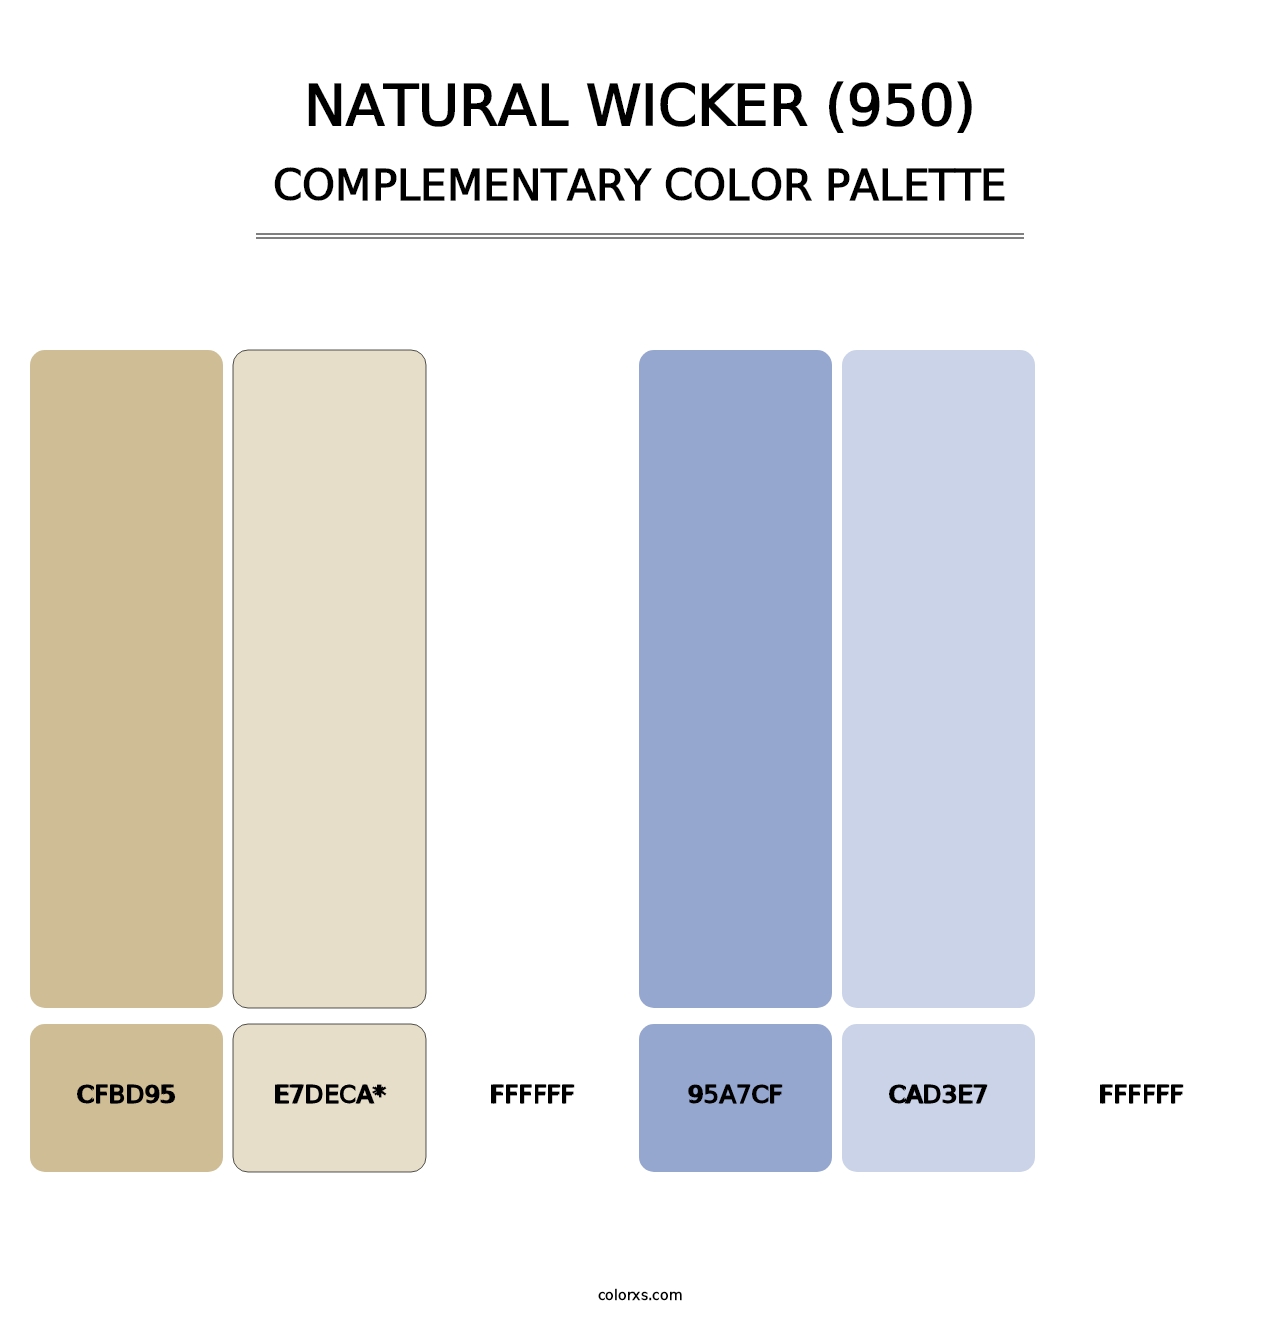 Natural Wicker (950) - Complementary Color Palette